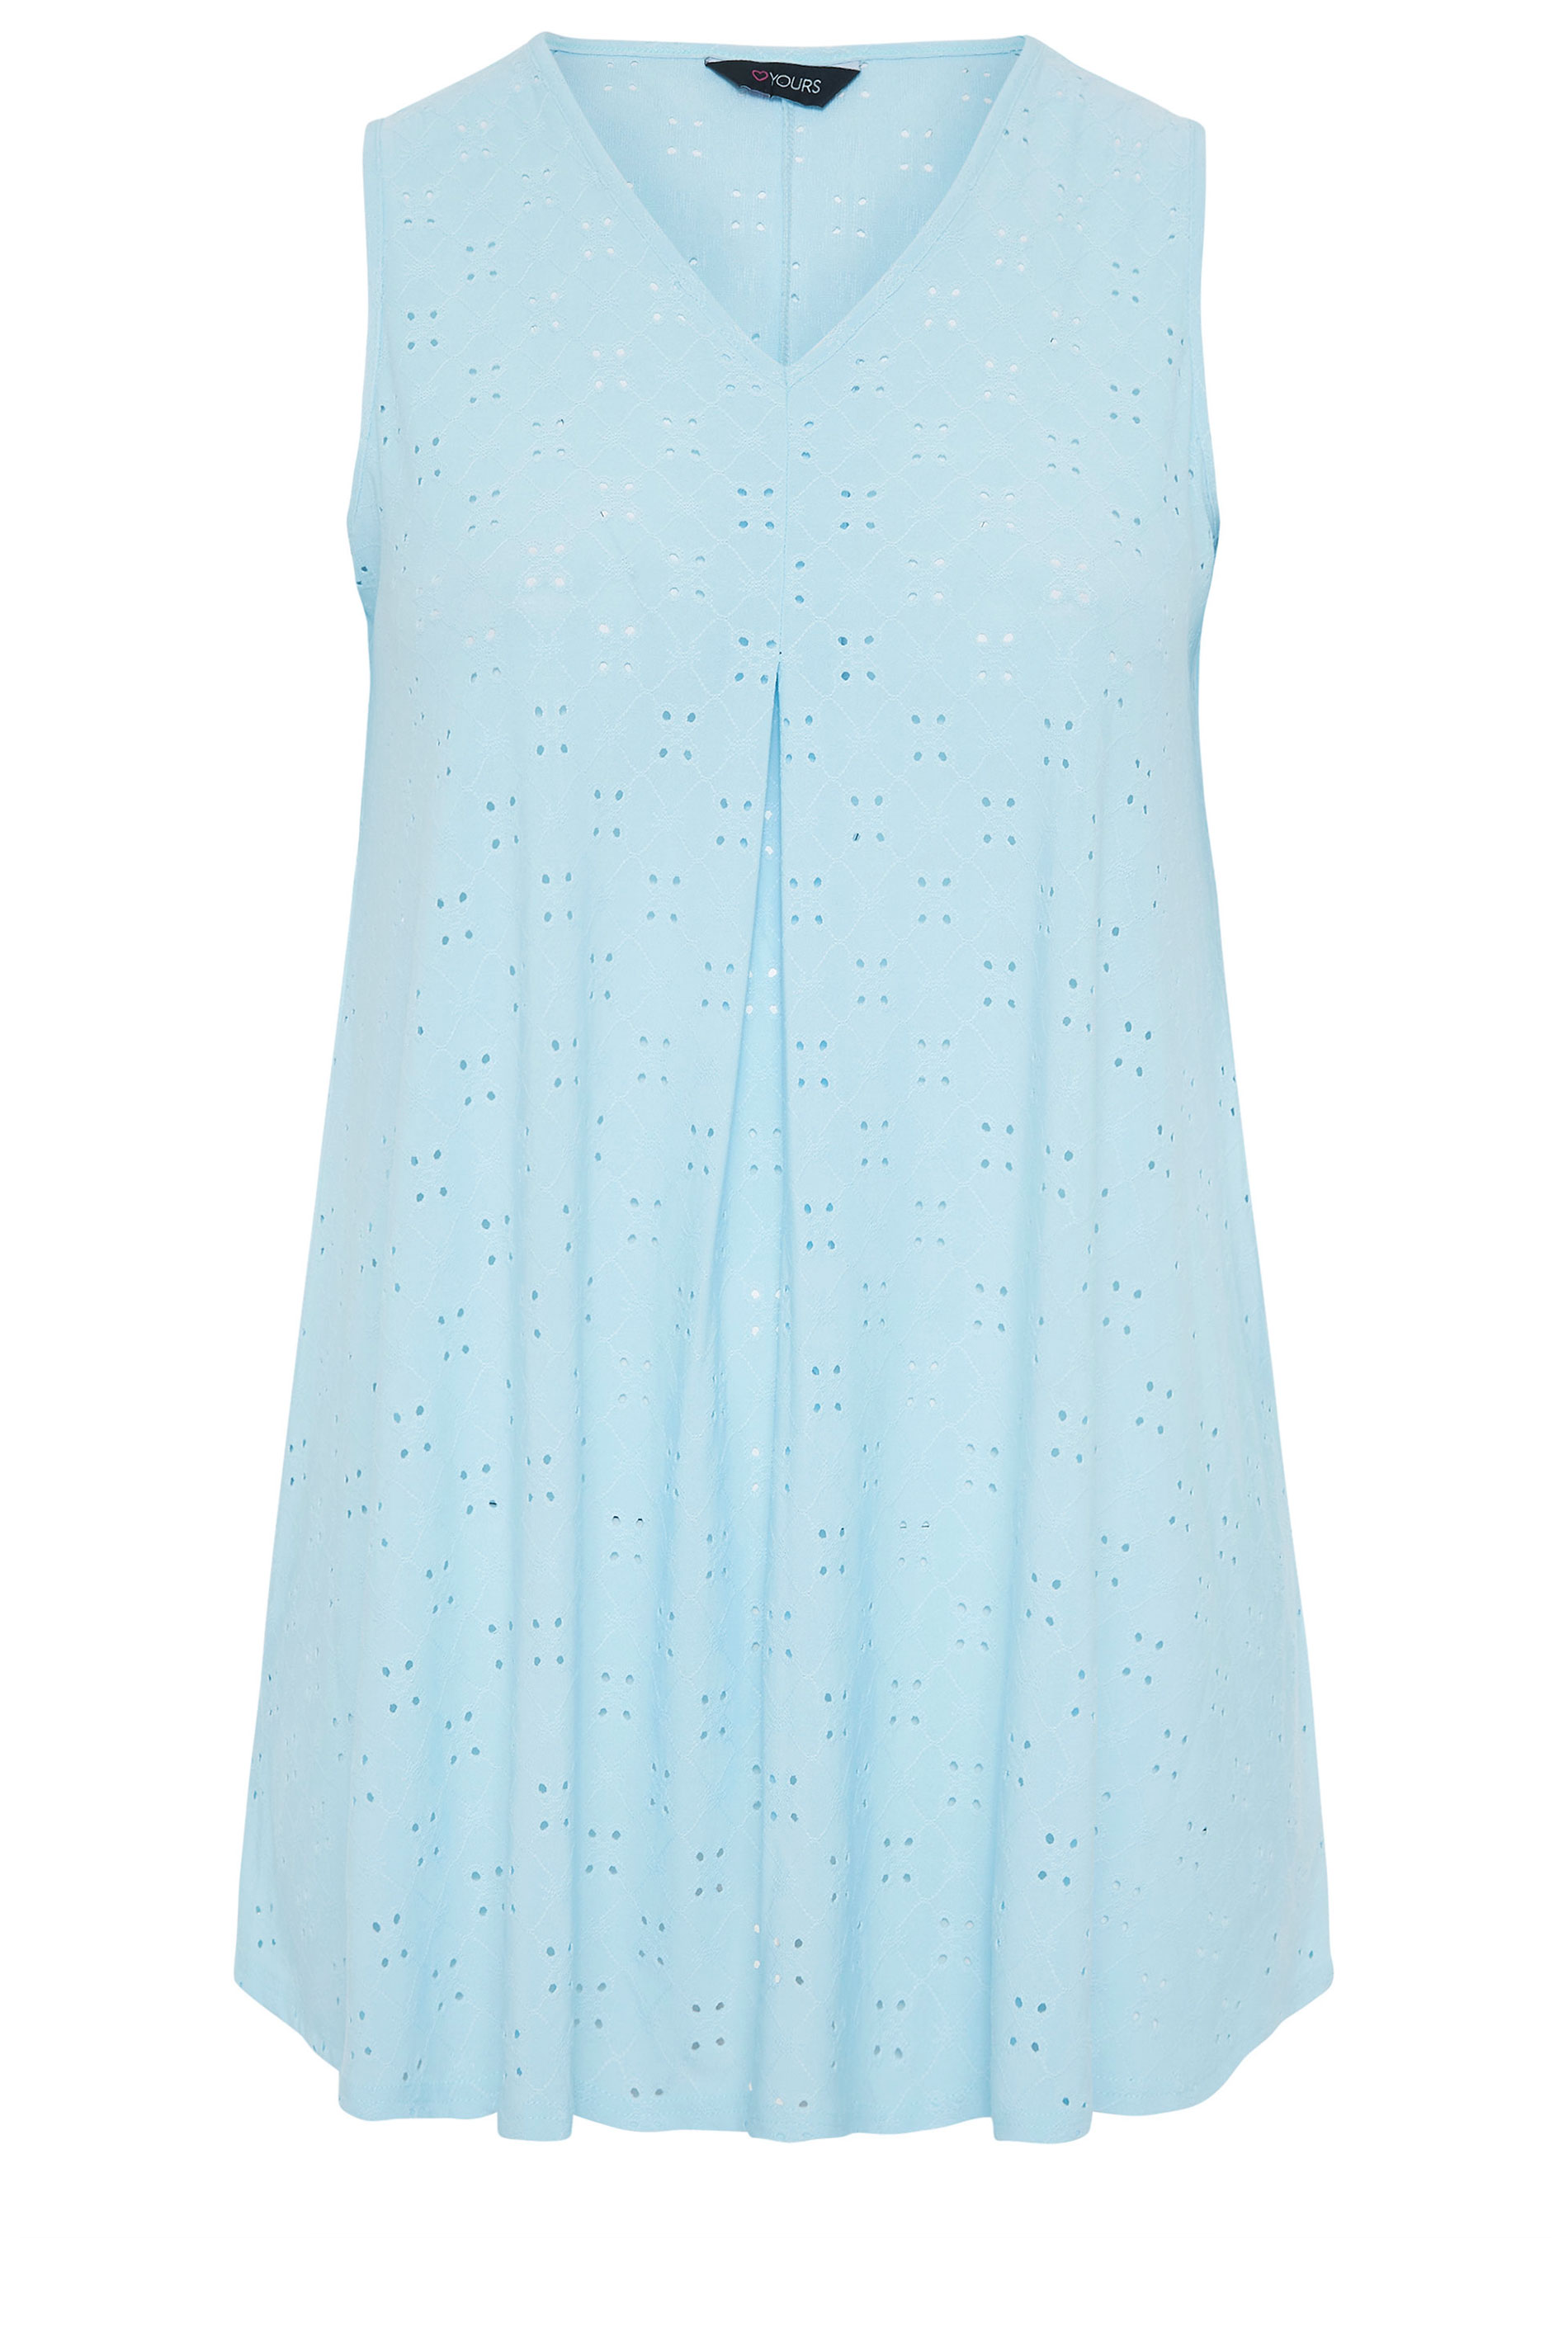 Light Blue Broderie Anglaise Swing Vest Top | Yours Clothing